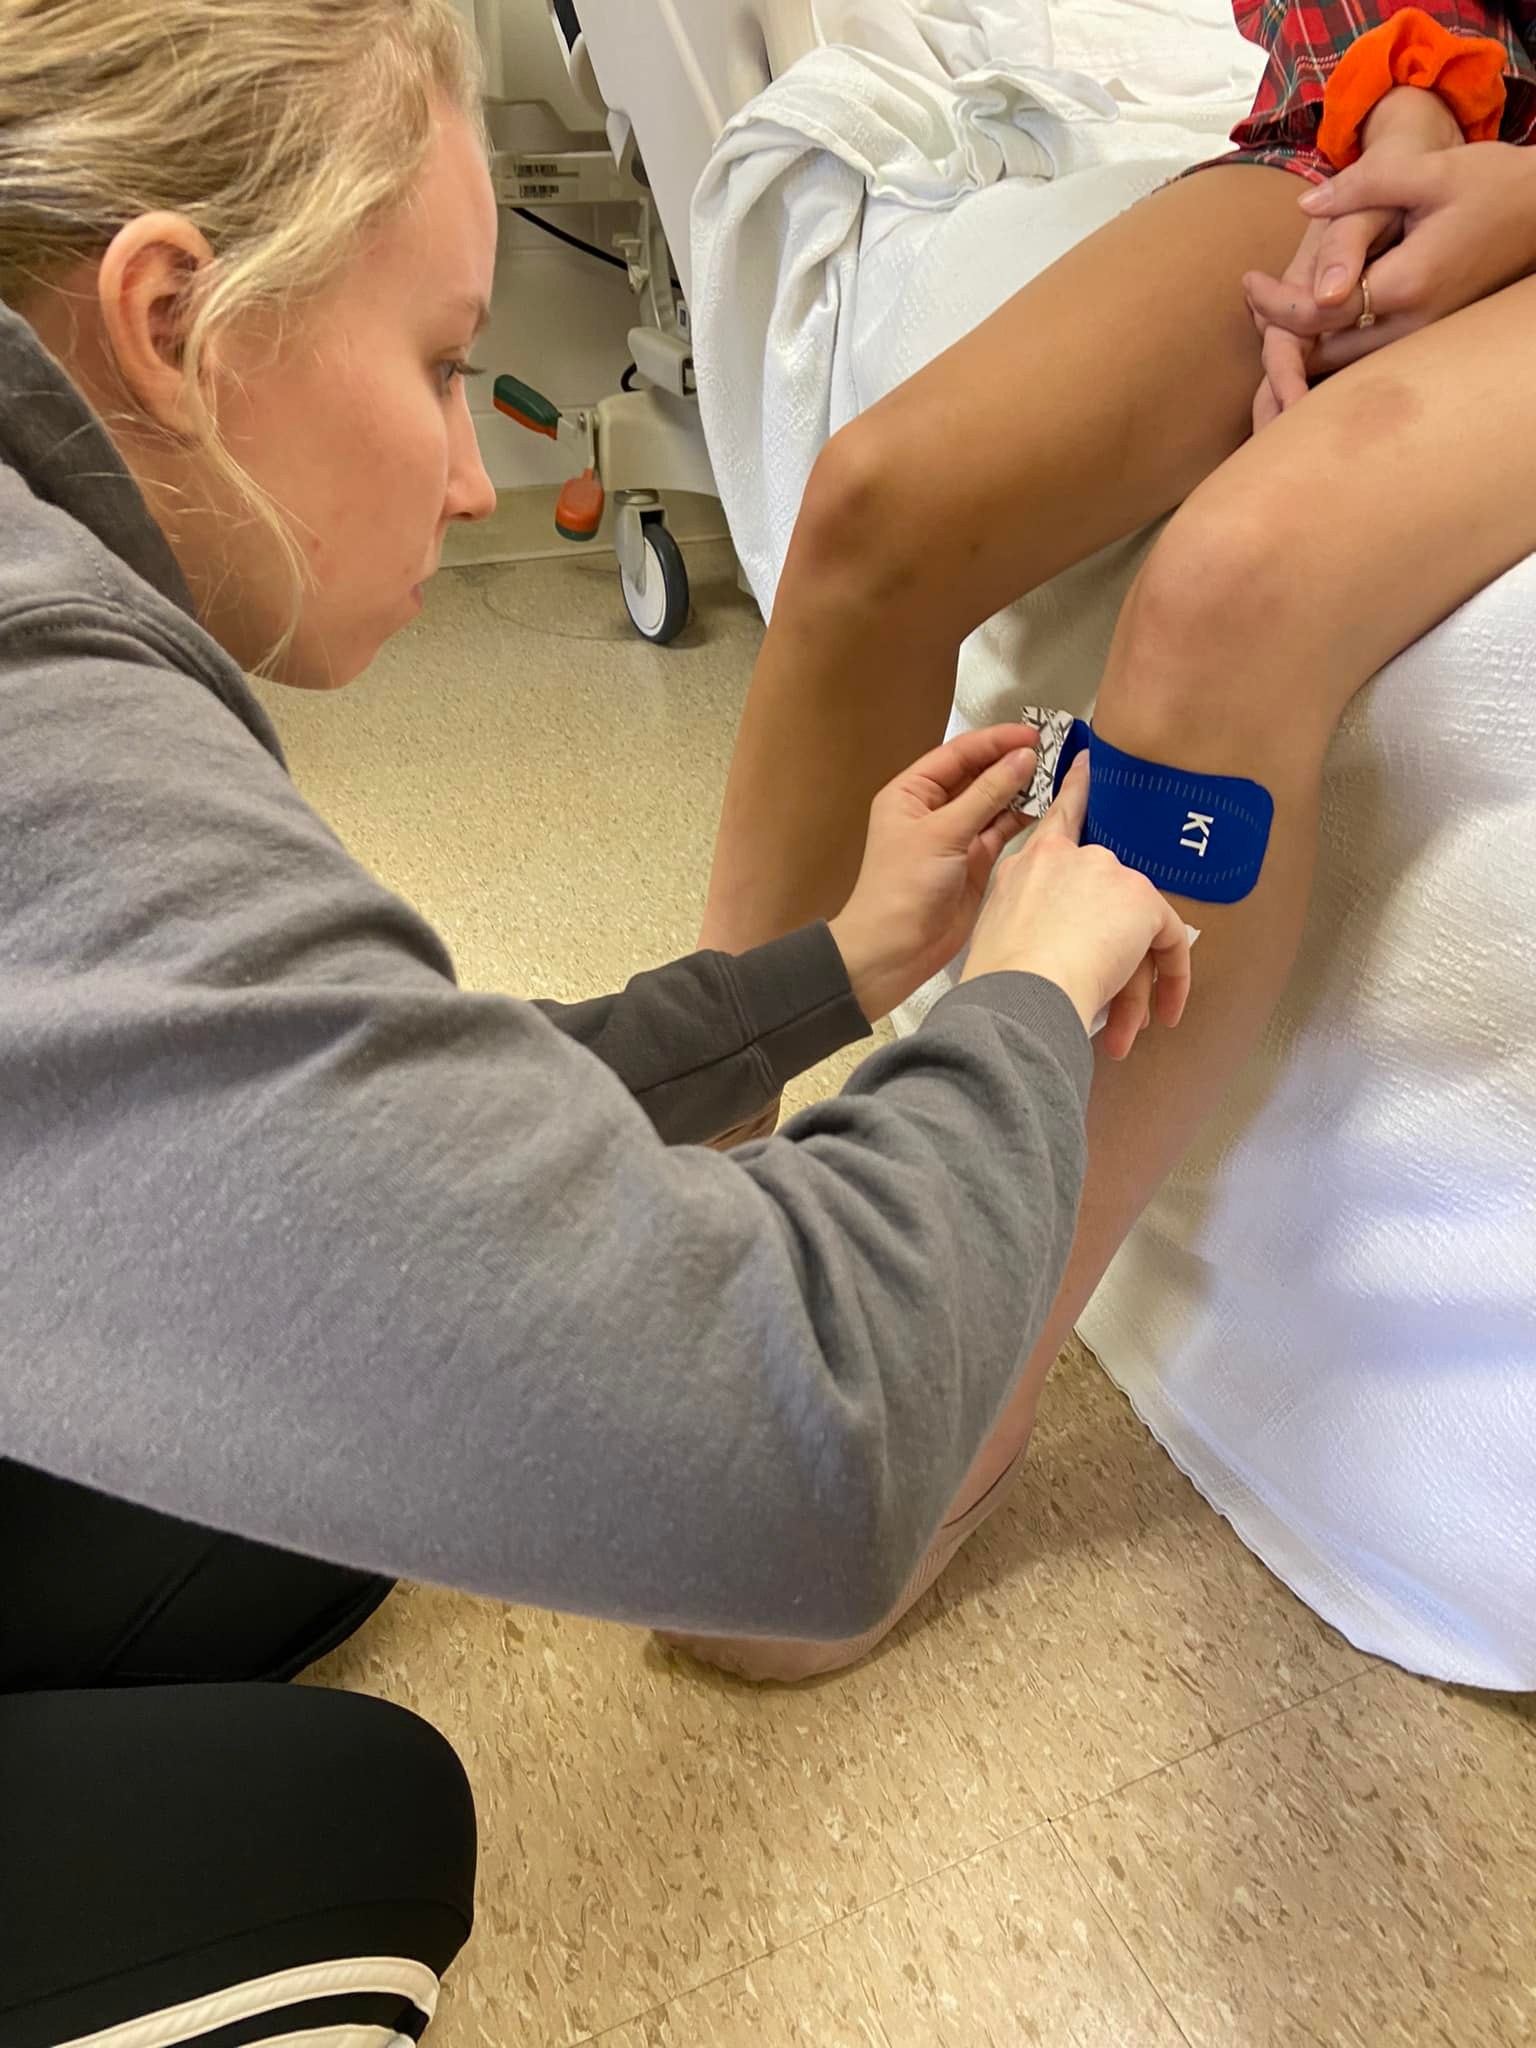 Personal training student is learning how to tape for an injury